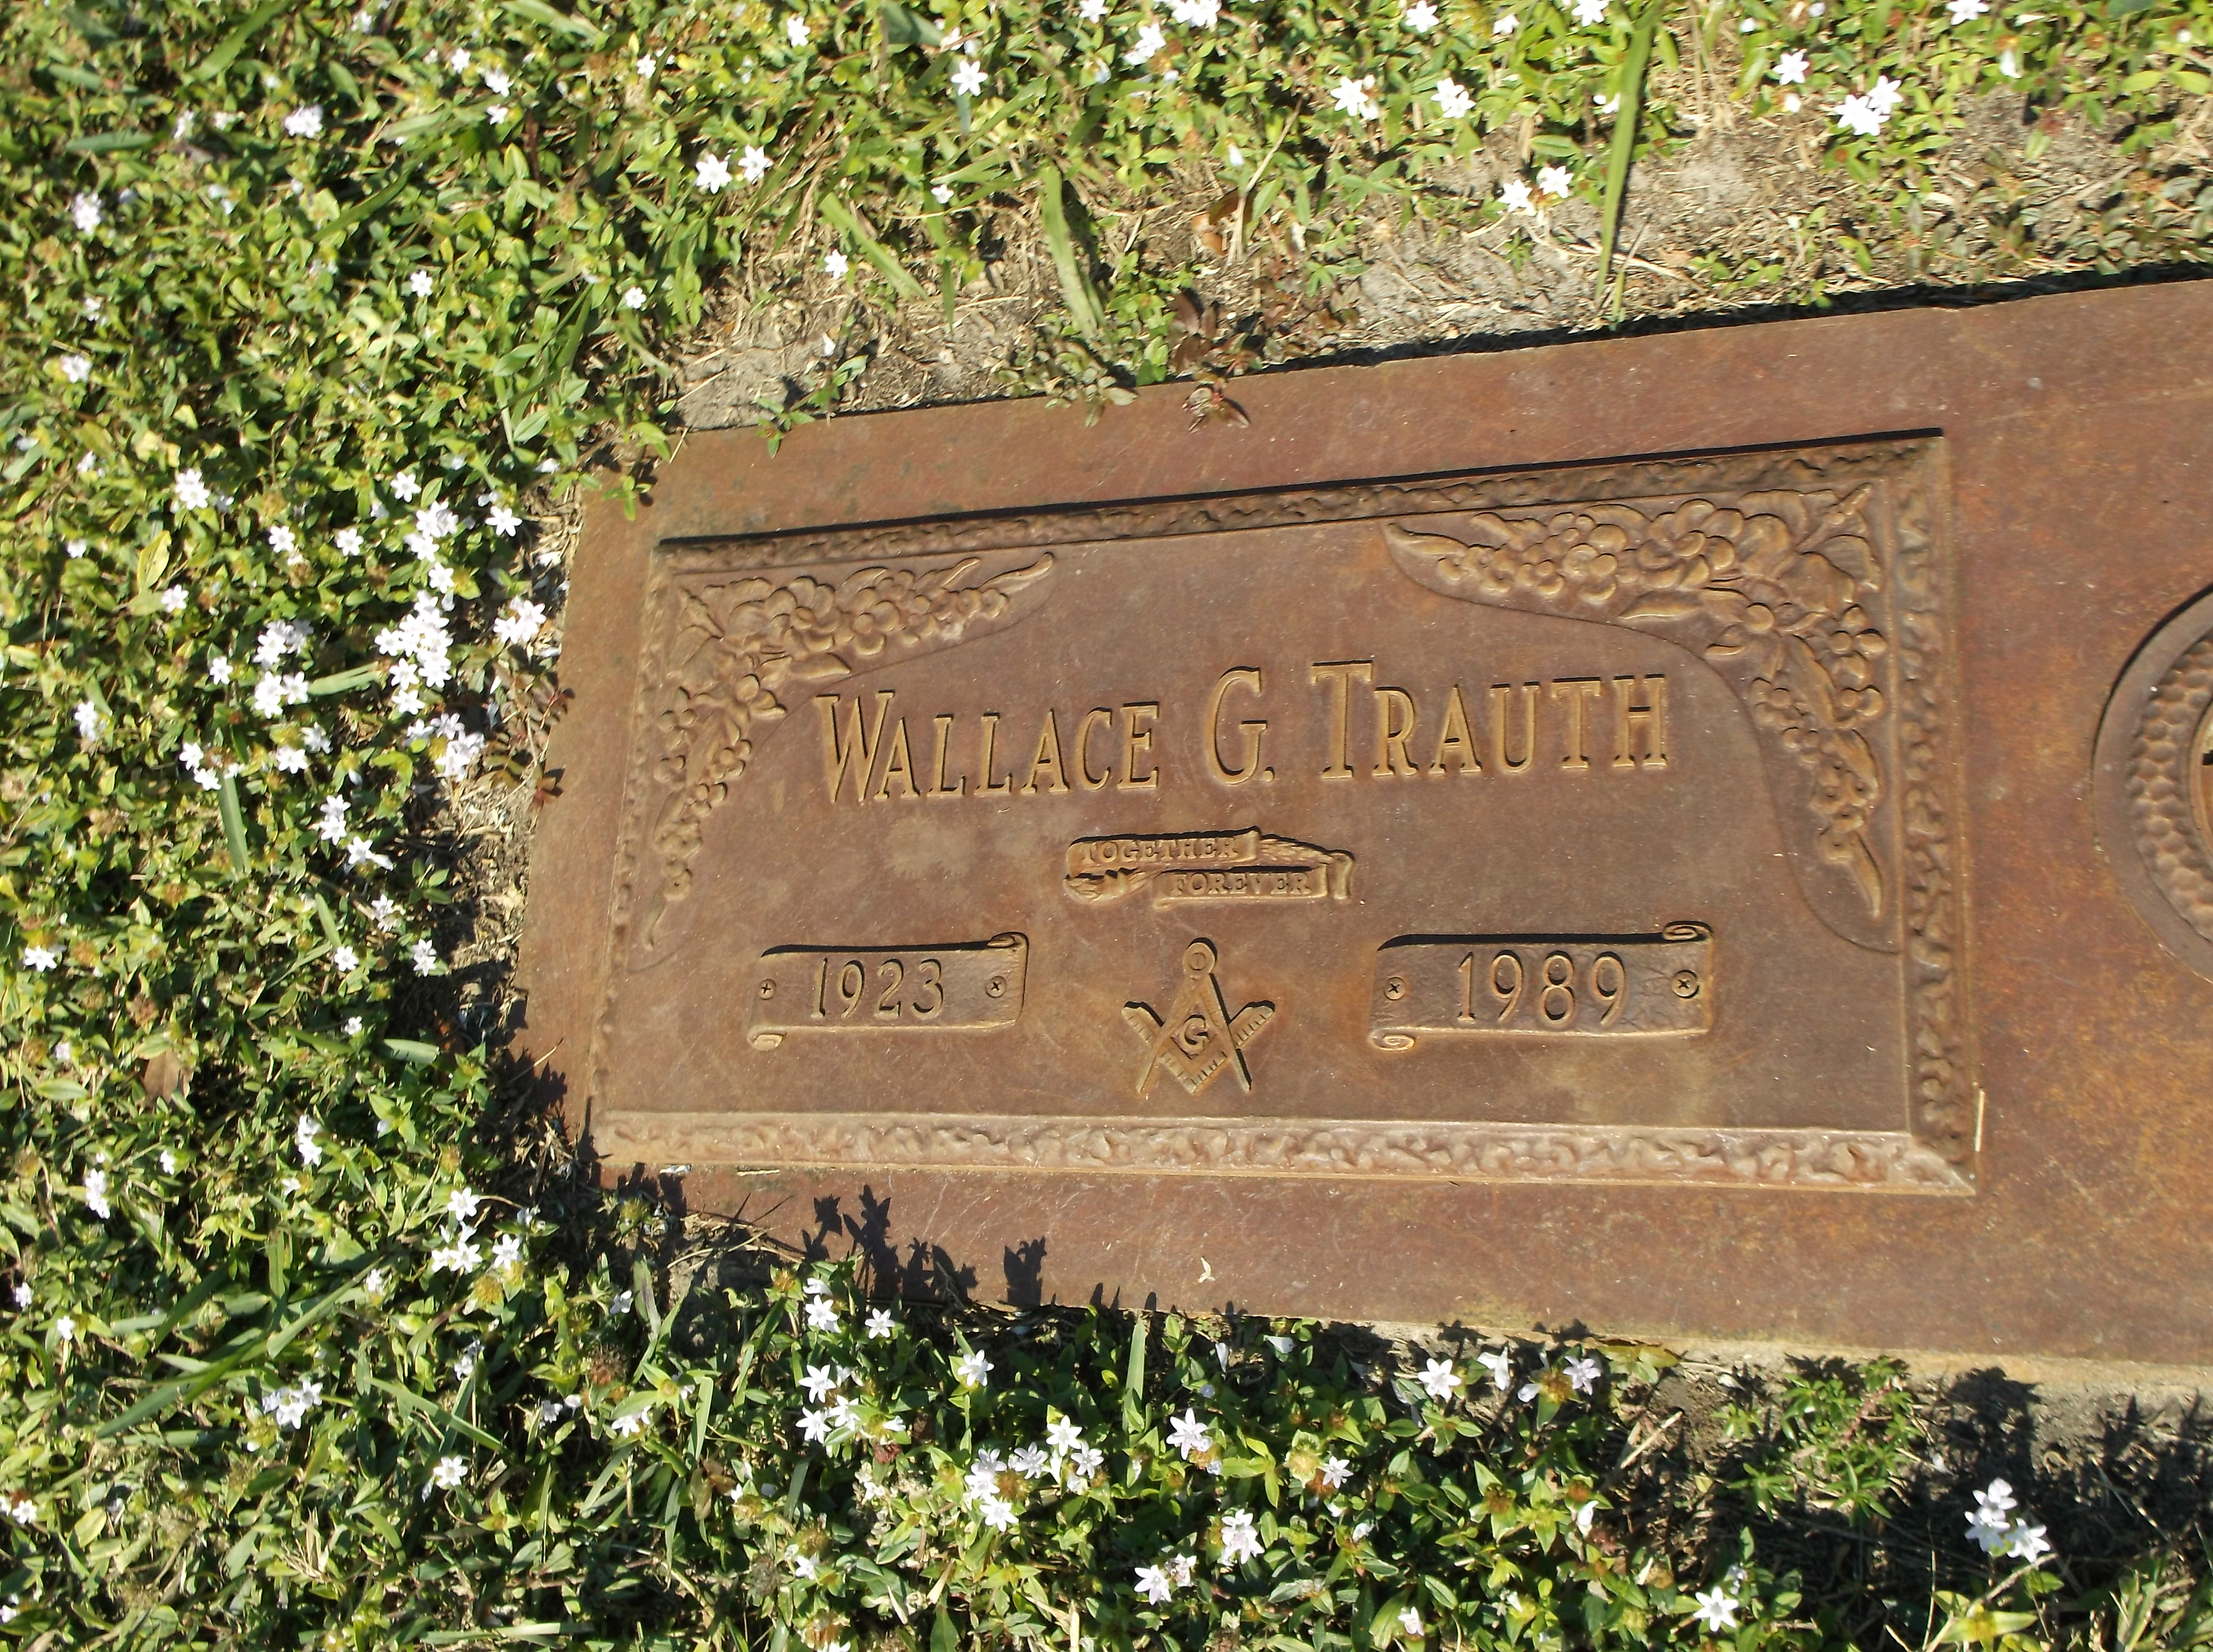 Wallace G Trauth